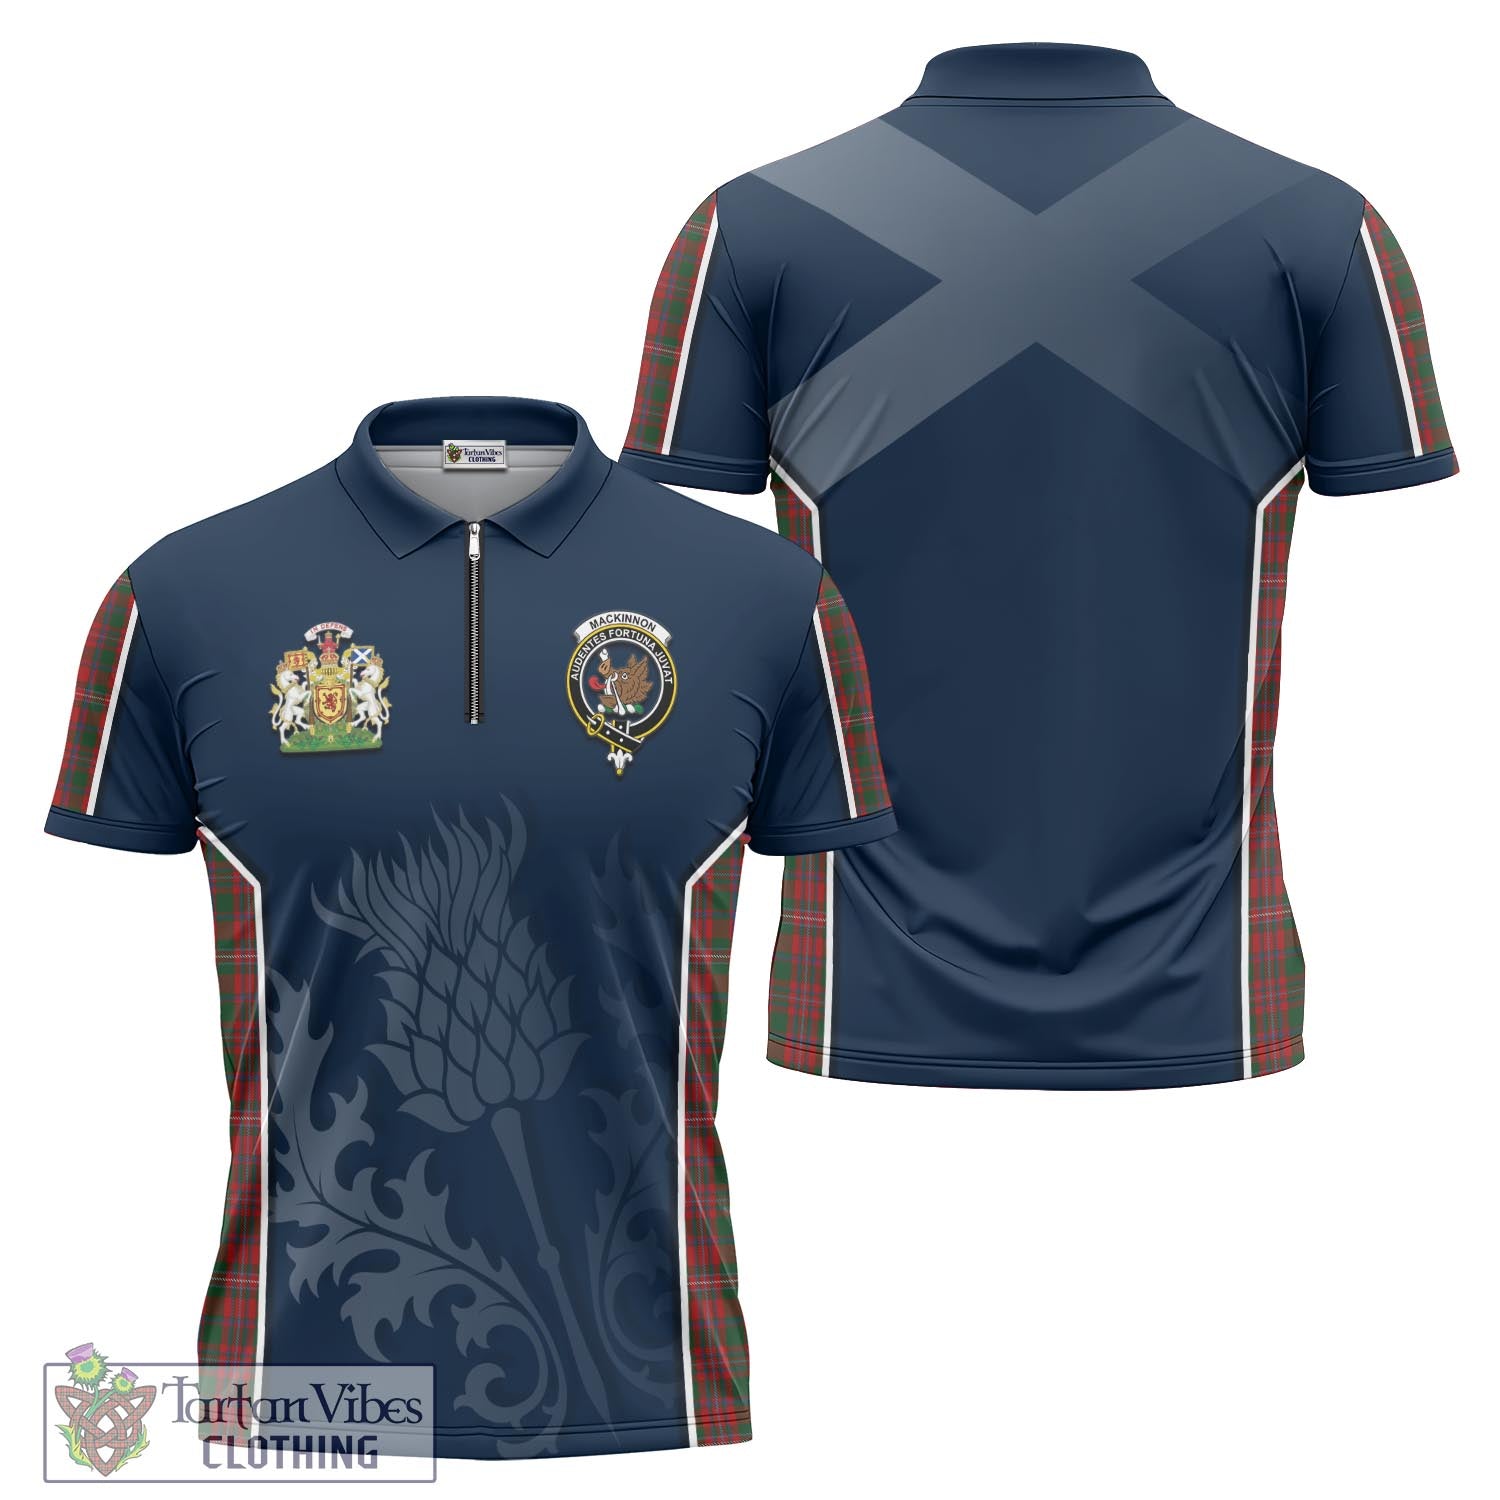 Tartan Vibes Clothing MacKinnon Tartan Zipper Polo Shirt with Family Crest and Scottish Thistle Vibes Sport Style